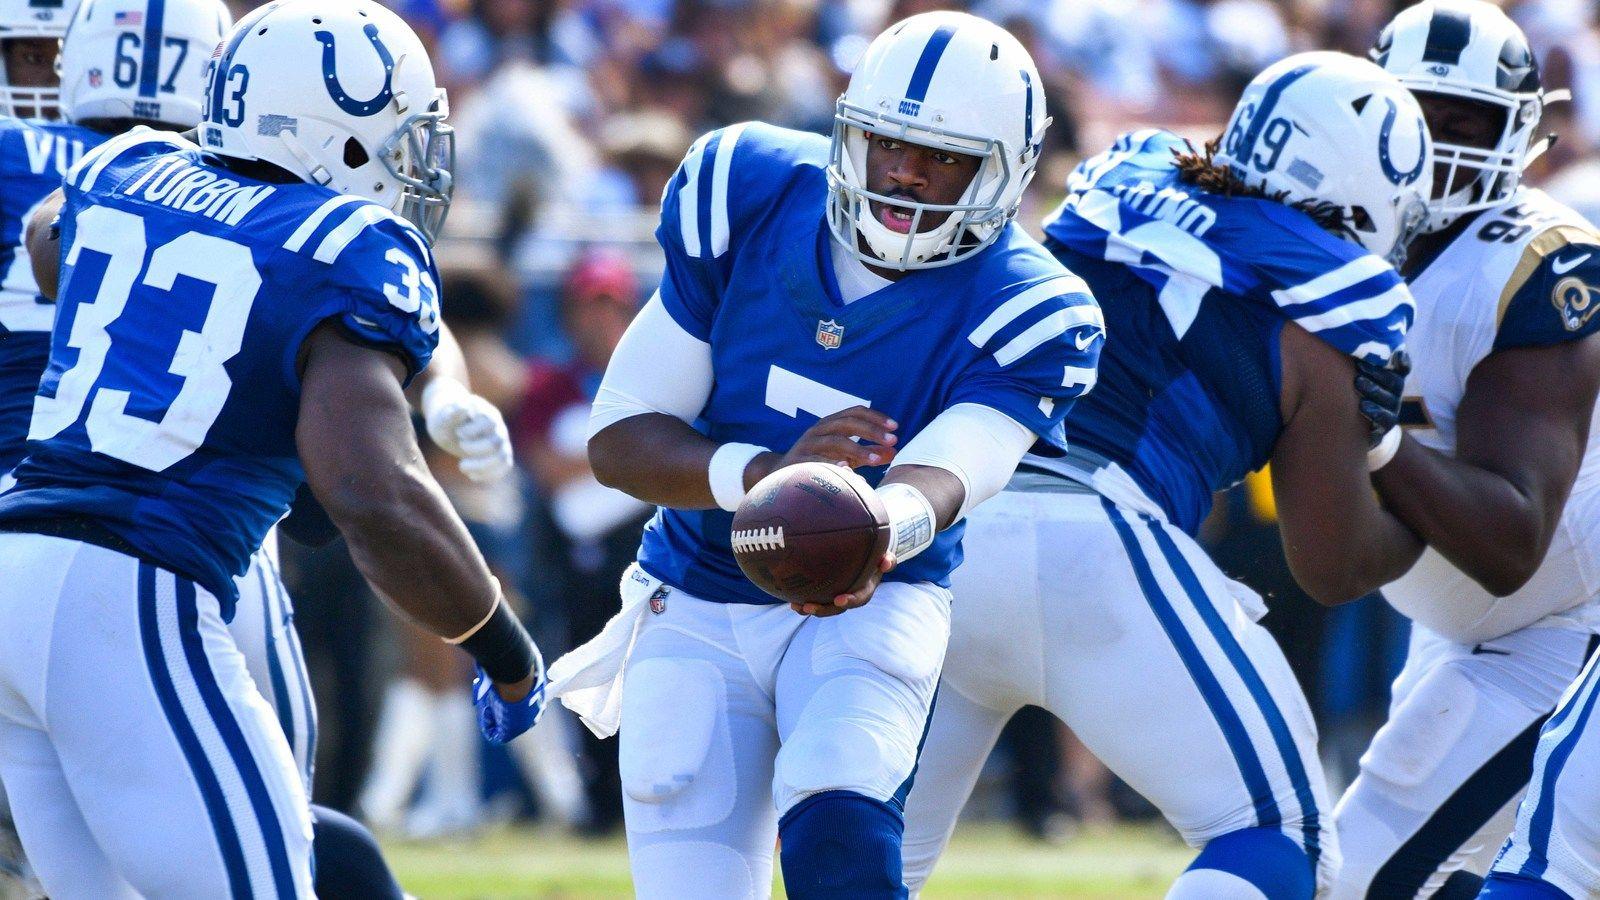 Report: Jacoby Brissett to start for Colts in Week 2